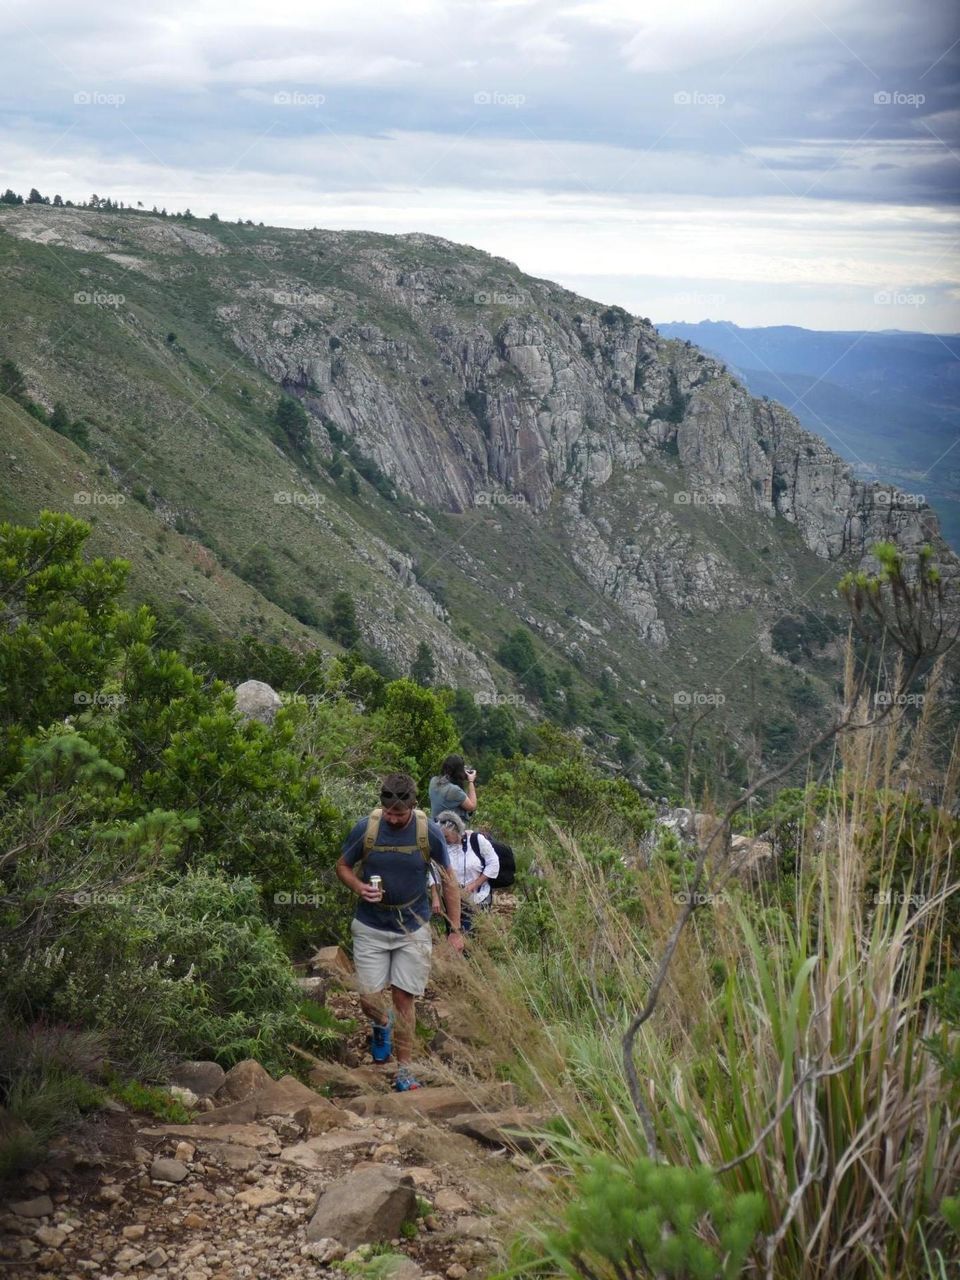 A hike up one of the steepest mountains in Nyanga, Zimbabwe 